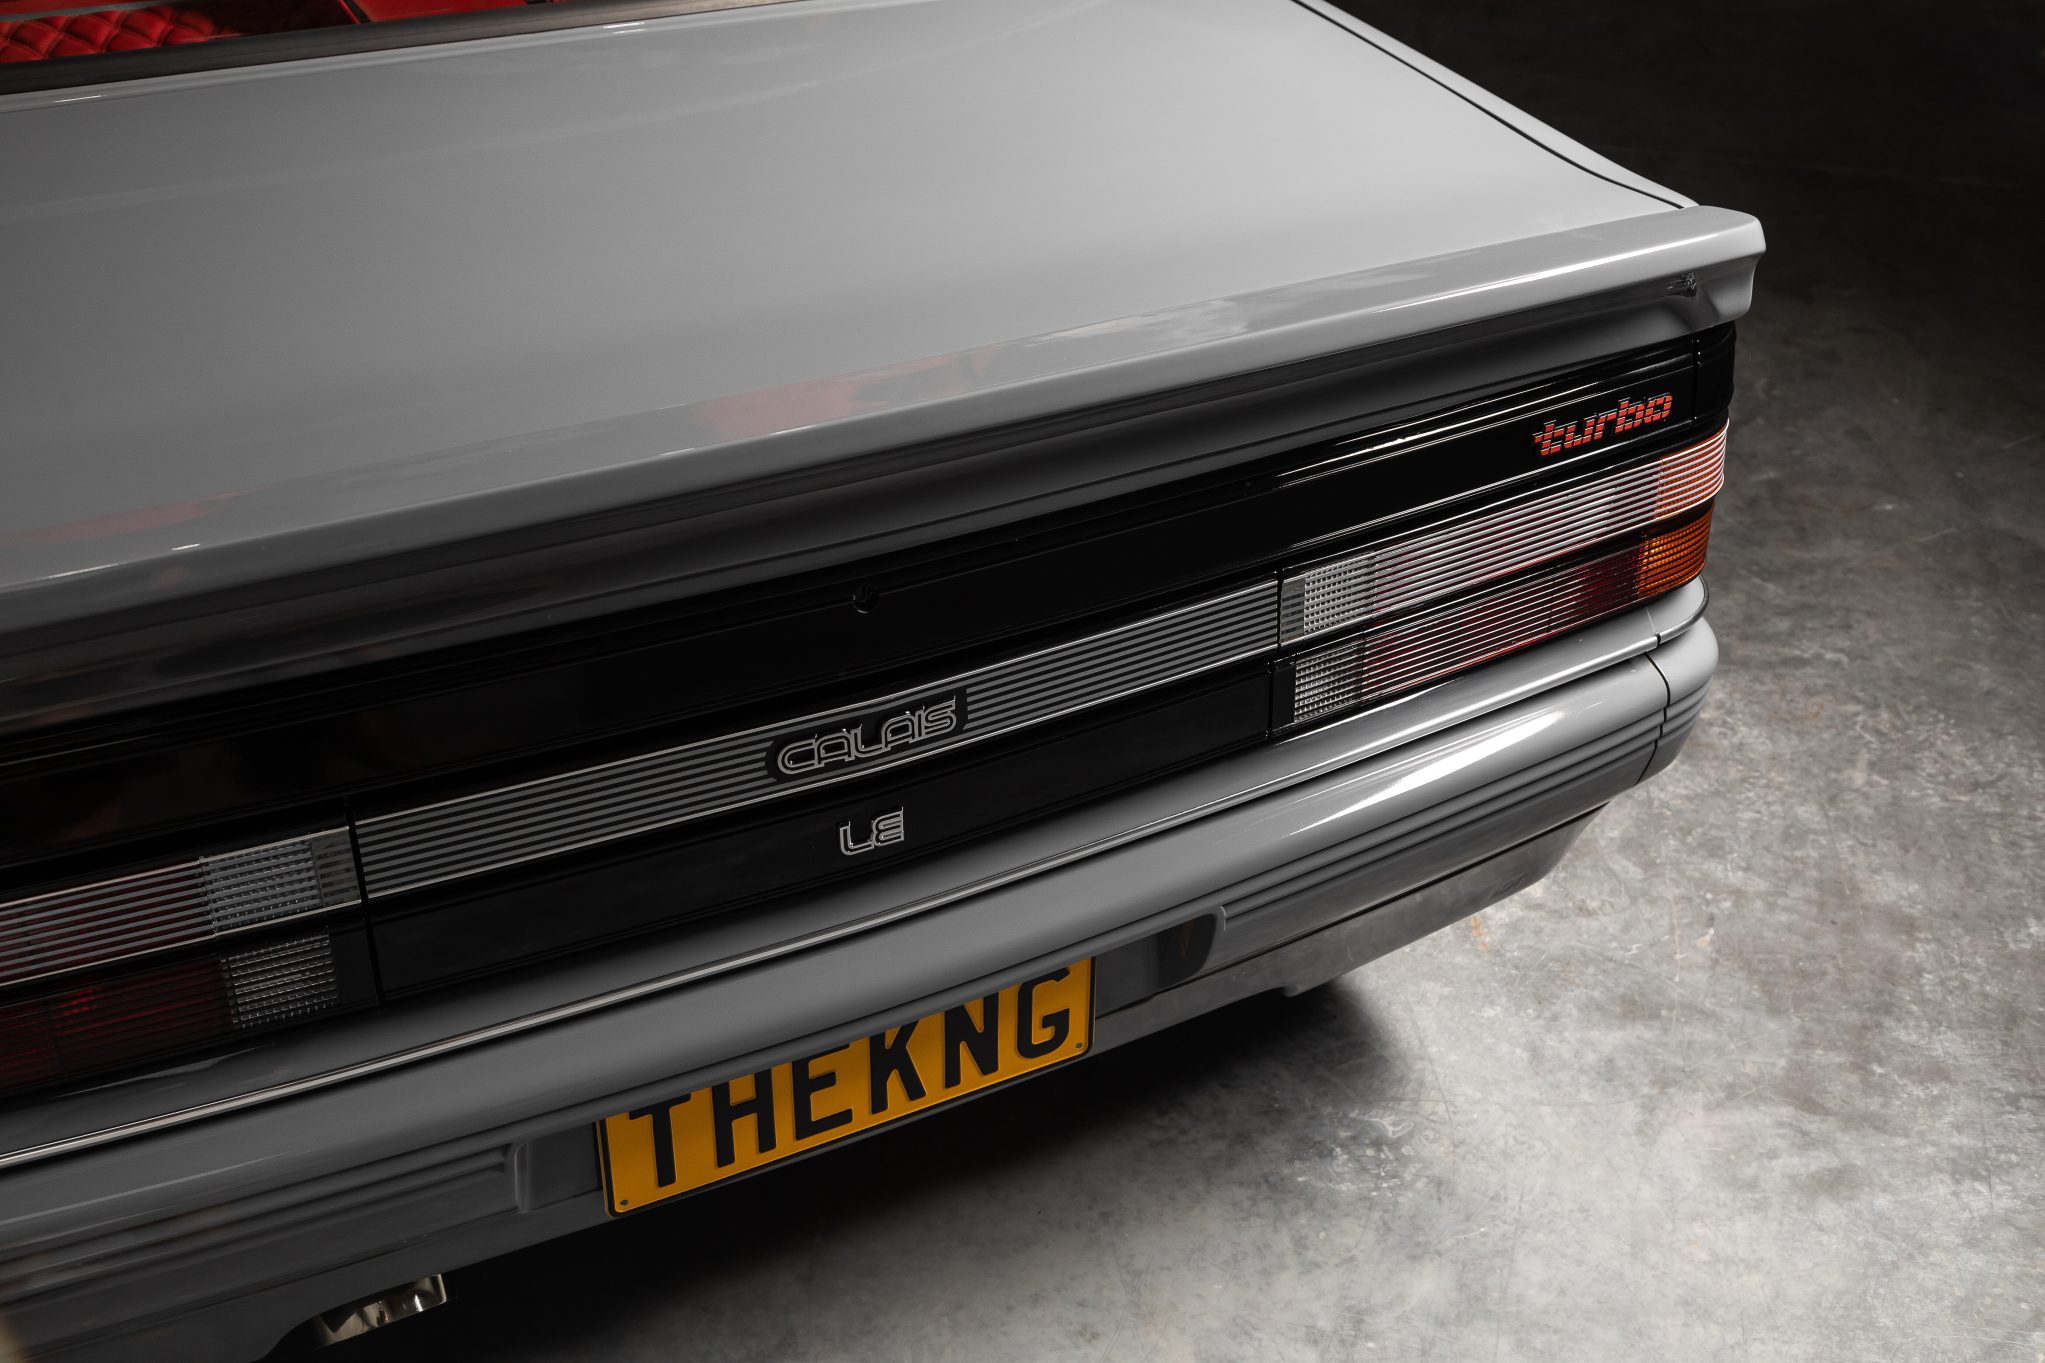 Street Machine Features Stefan Tomevski Vl Commodore Thekng Tail Light